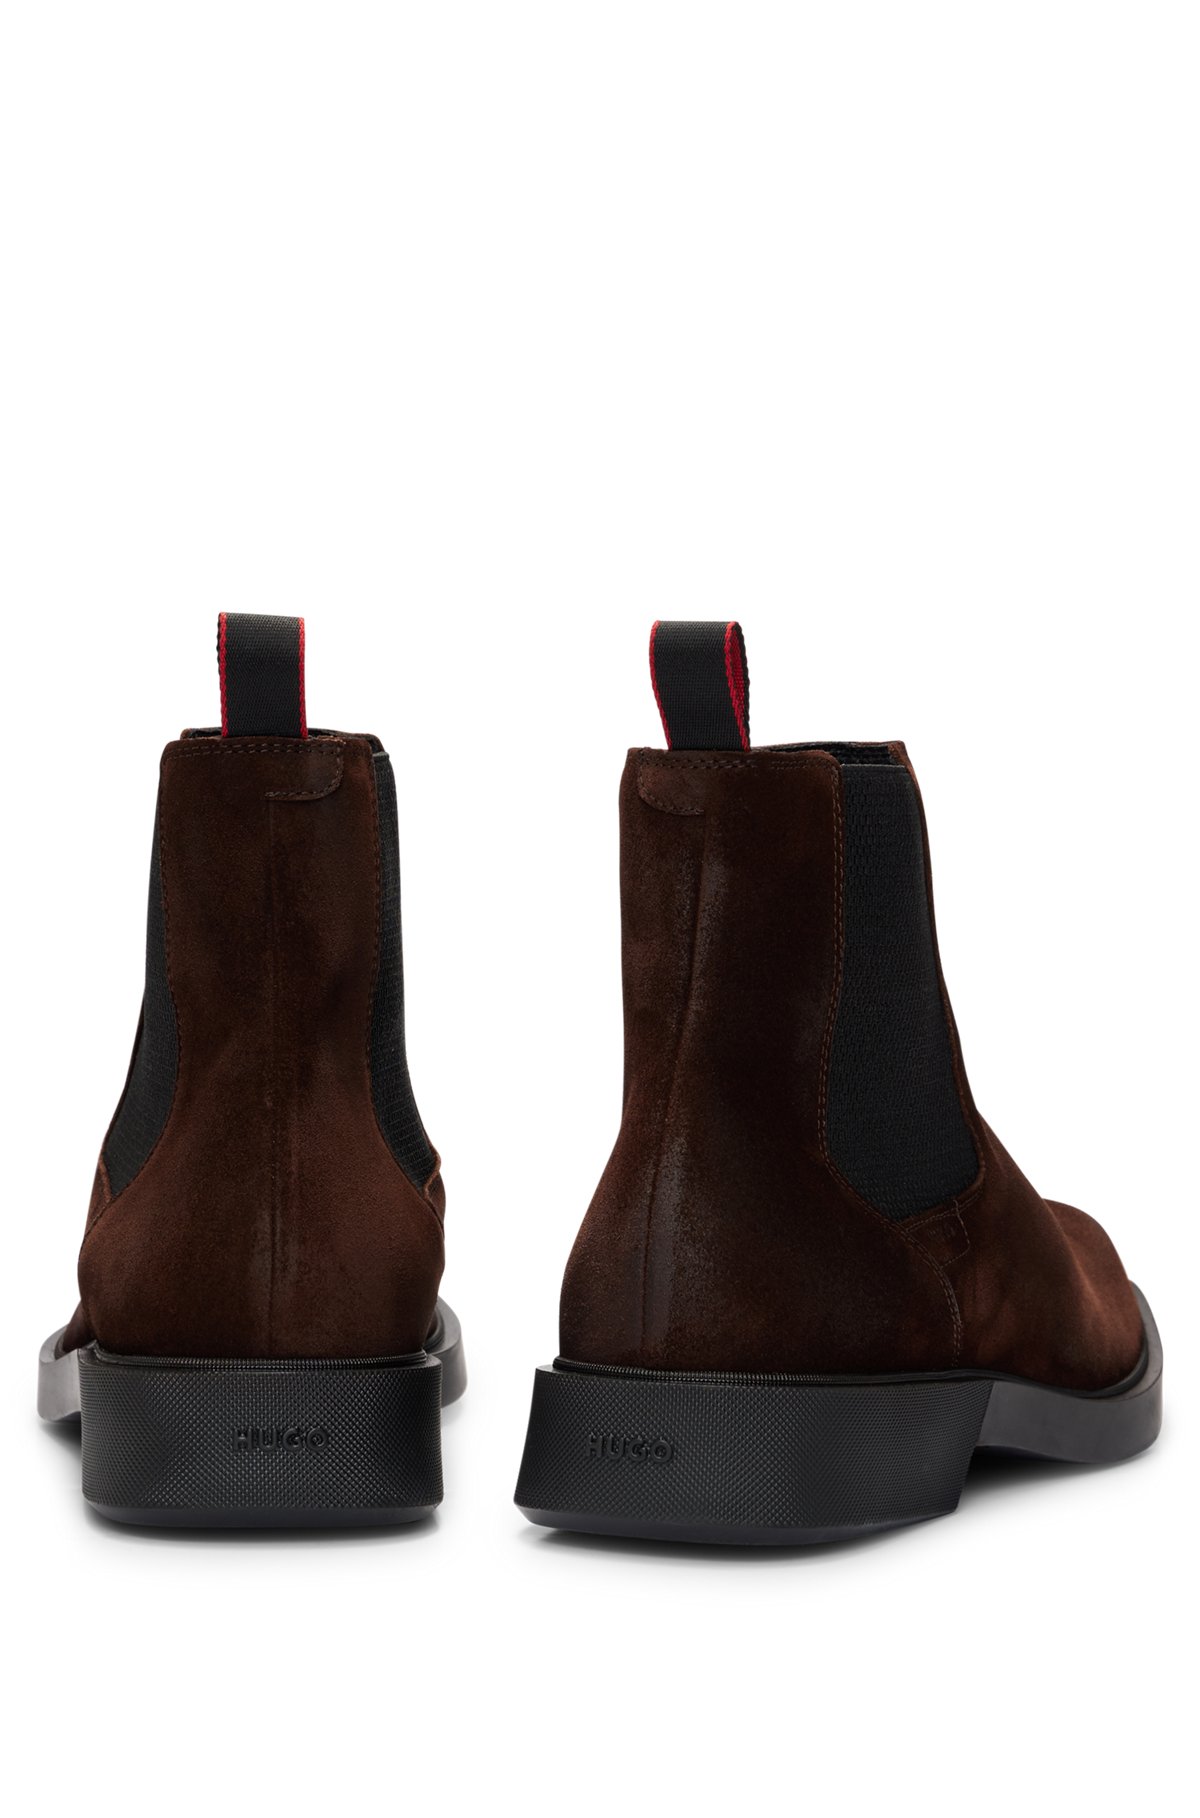 HUGO - Square-toe Chelsea boots in suede with signature details